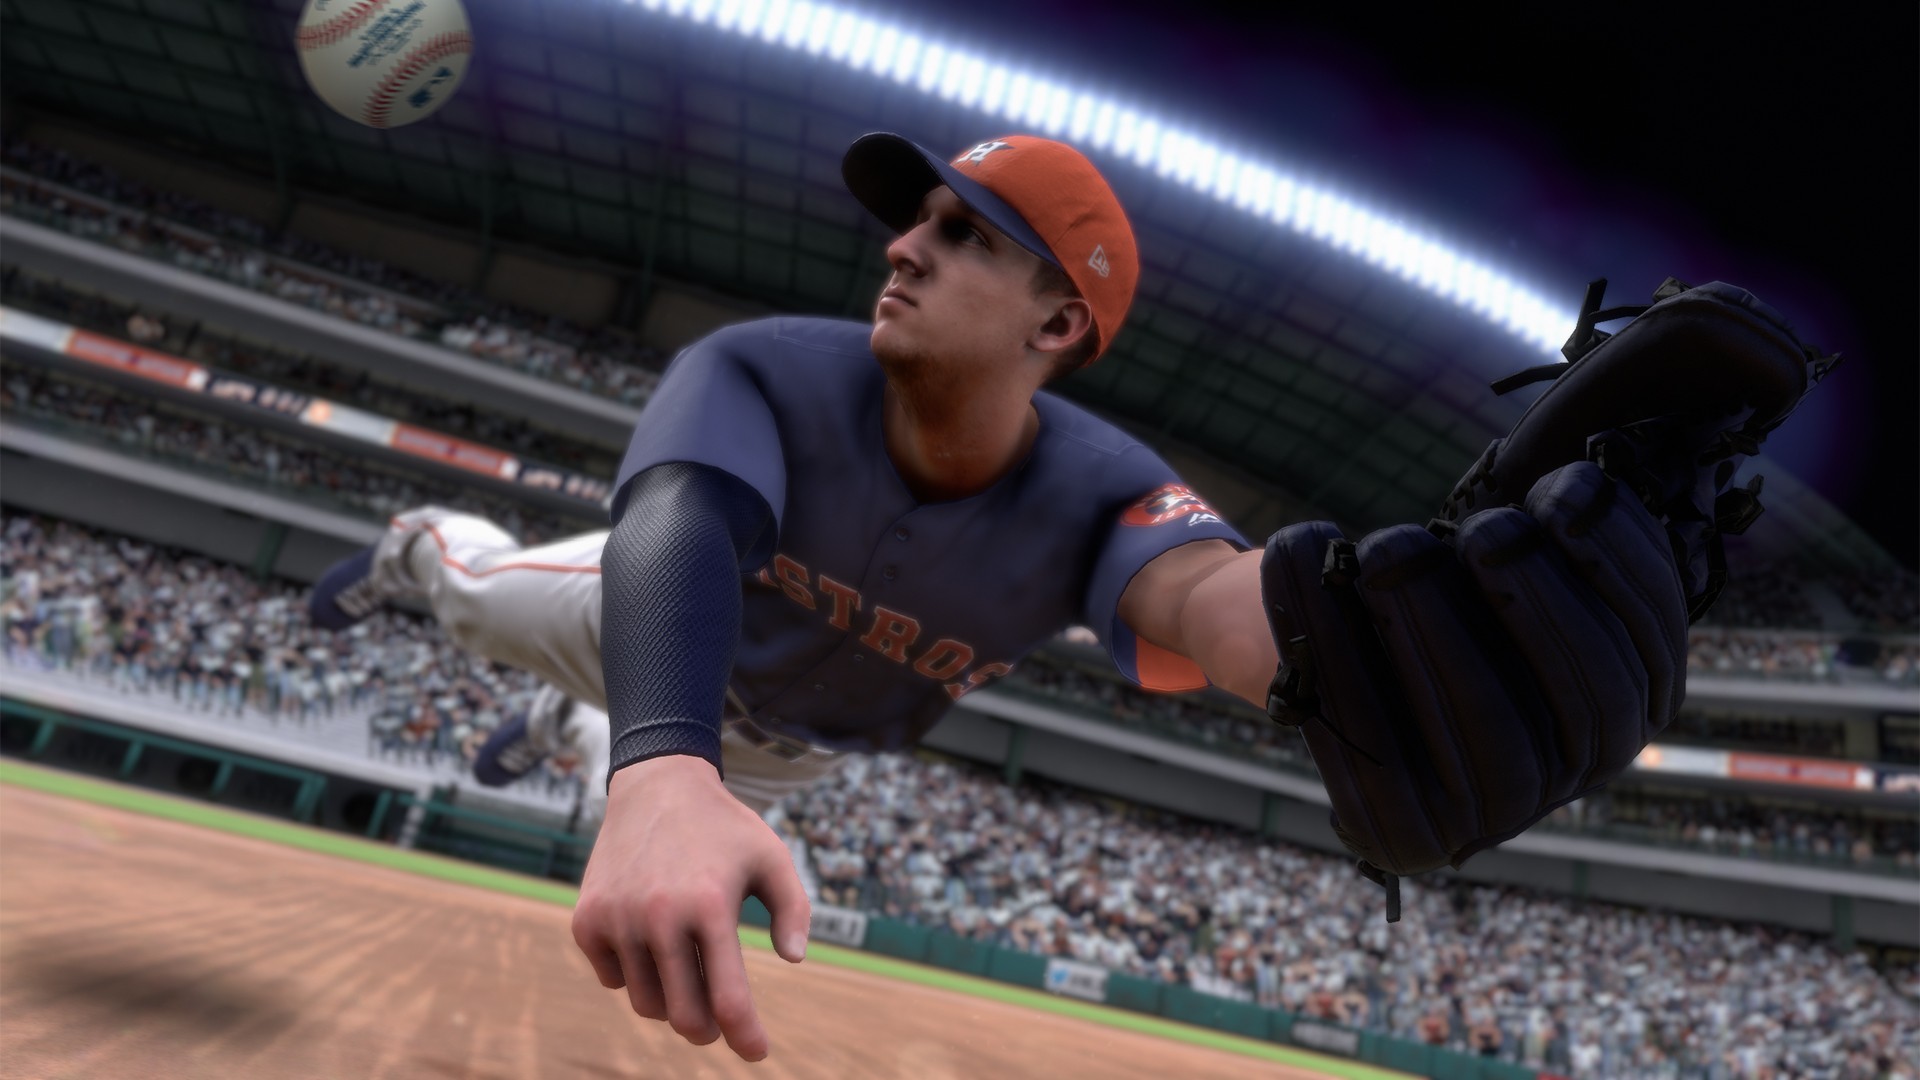 R.B.I. Baseball 19 is Available Now on Xbox One